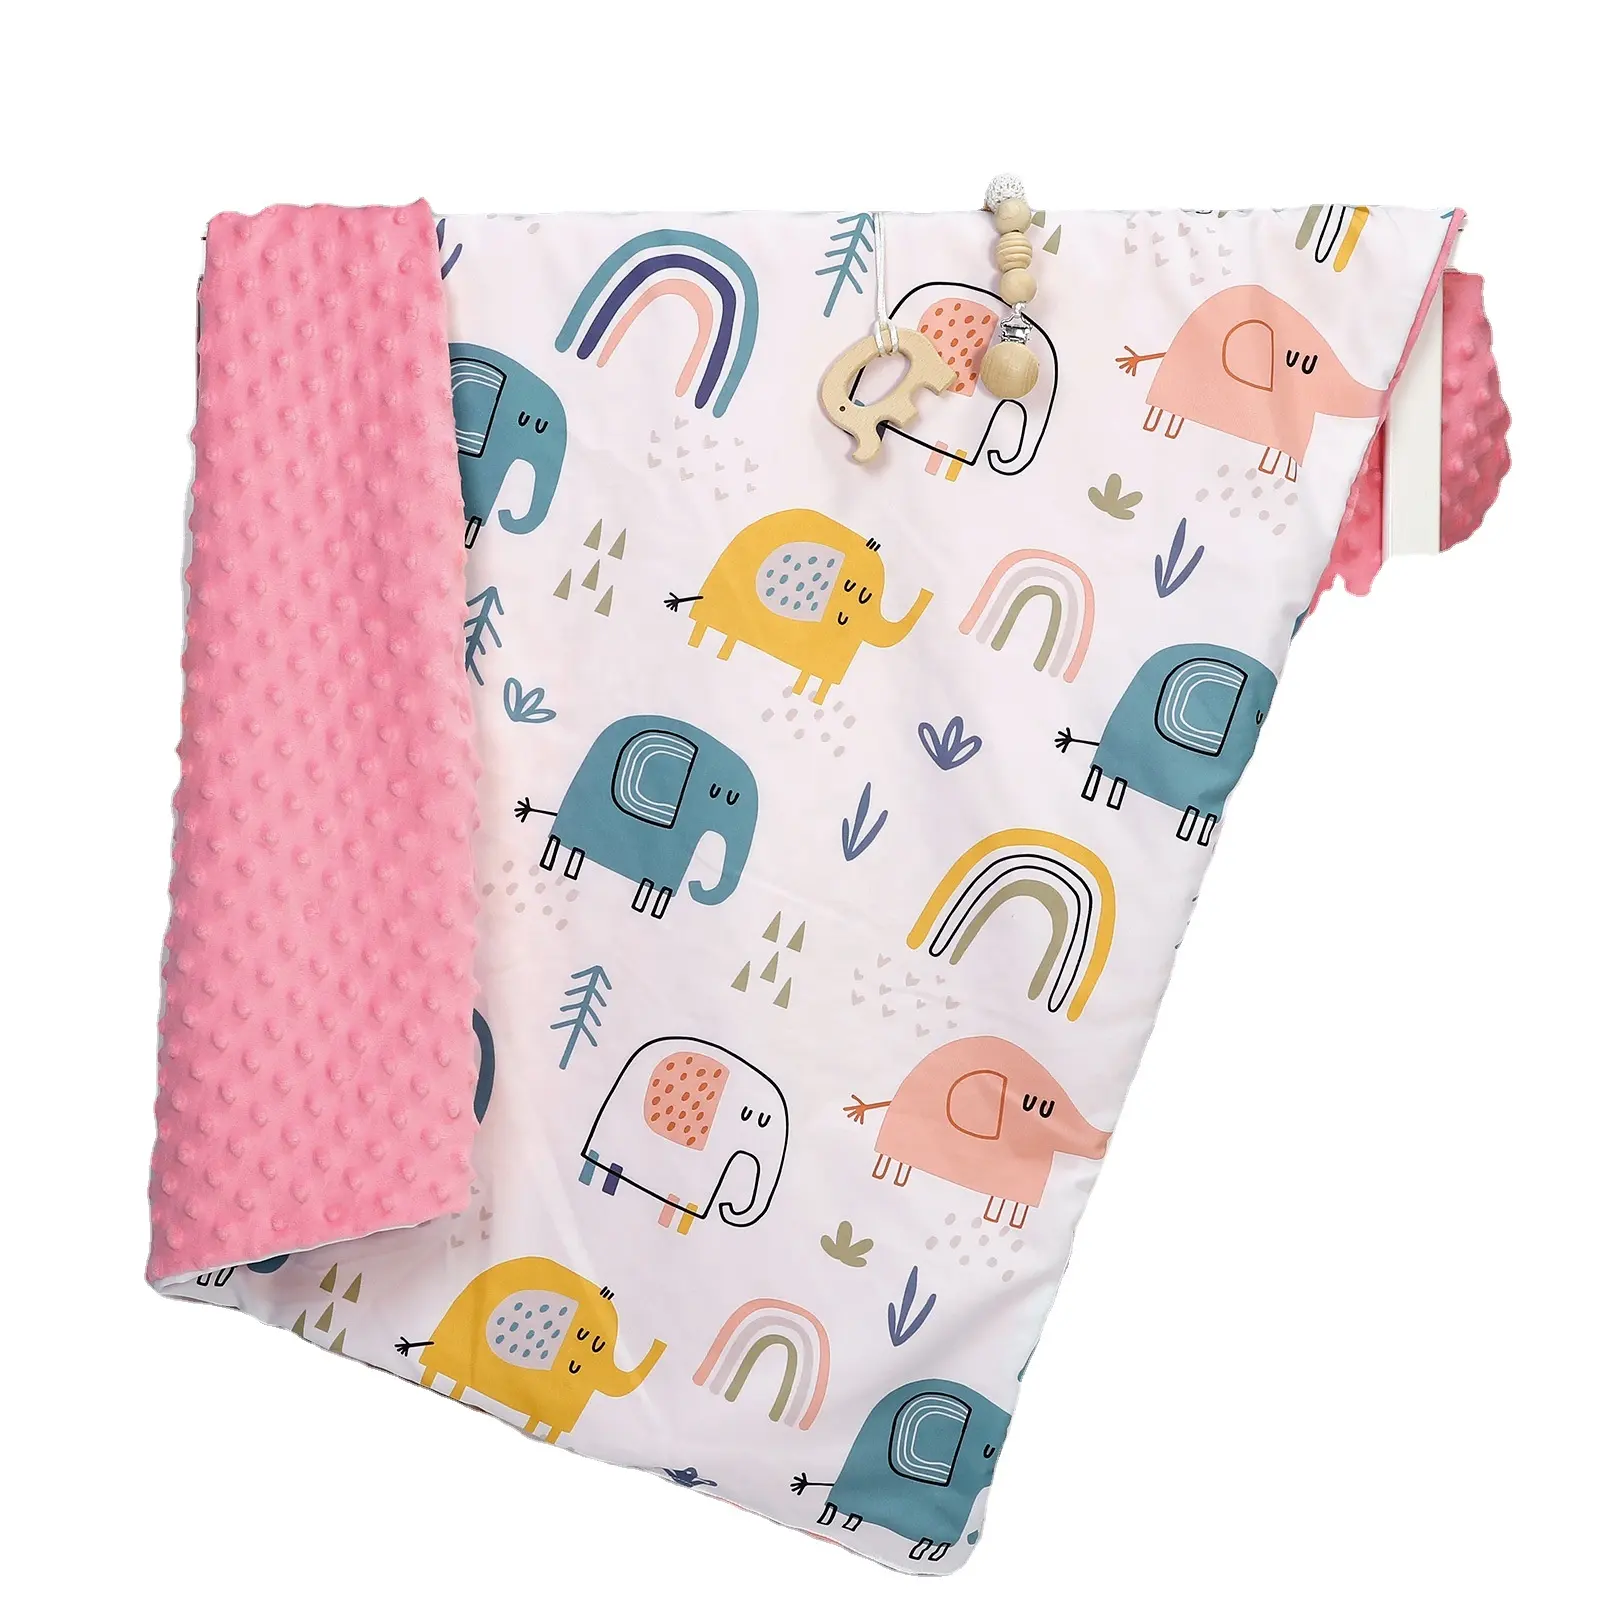 Super Soft Minky Dot Fabric 100% Polyester for Kids Blanket comfortable and warm baby blanket